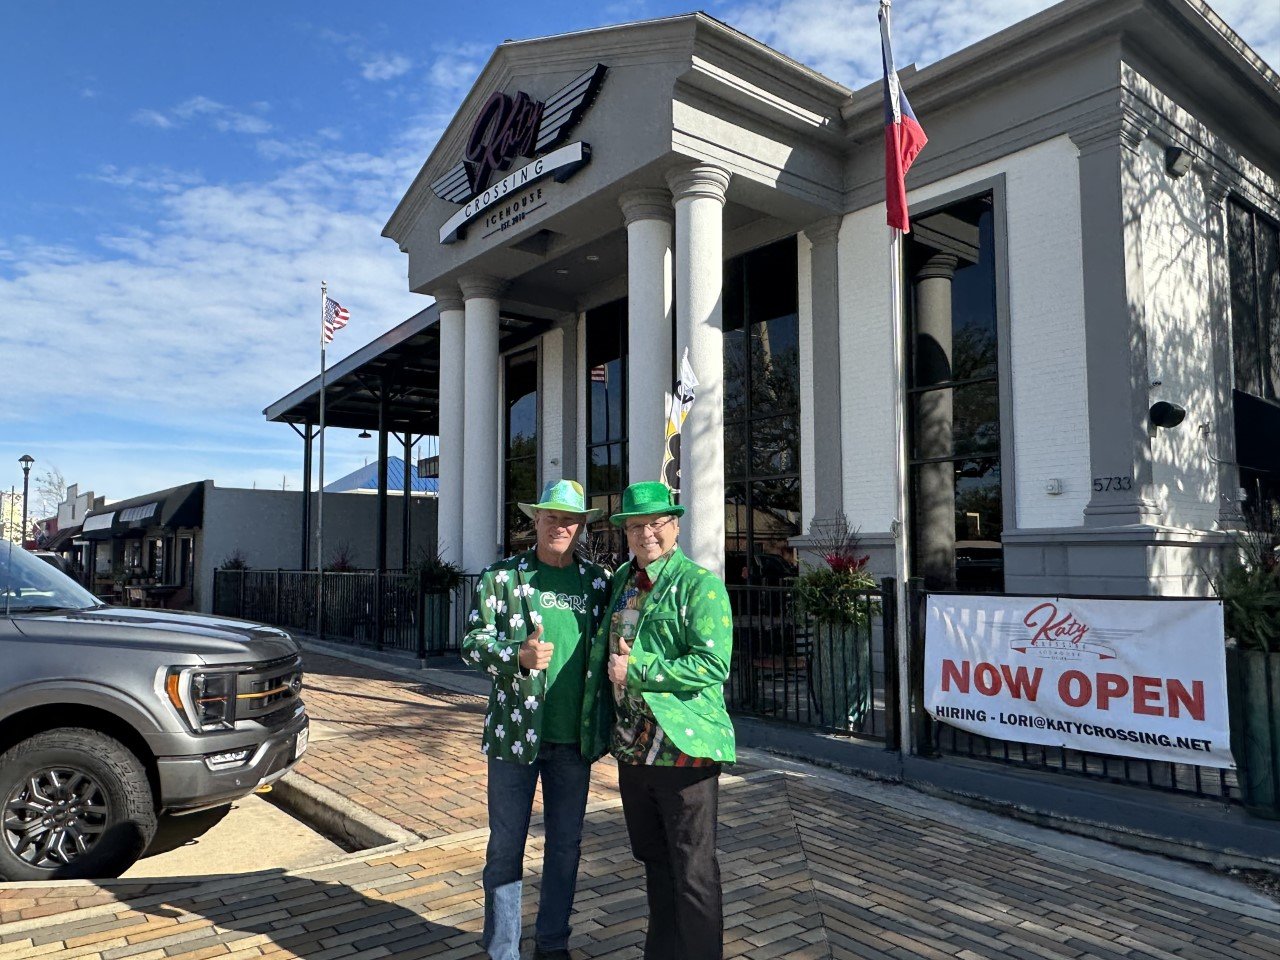 Bill Fanning, left, Katy Crossing Icehouse owner, and Don McCoy, Fulshear-Katy Area Chamber of Commerce president, show off their St. Patrick’s Day attire in front of the icehouse.